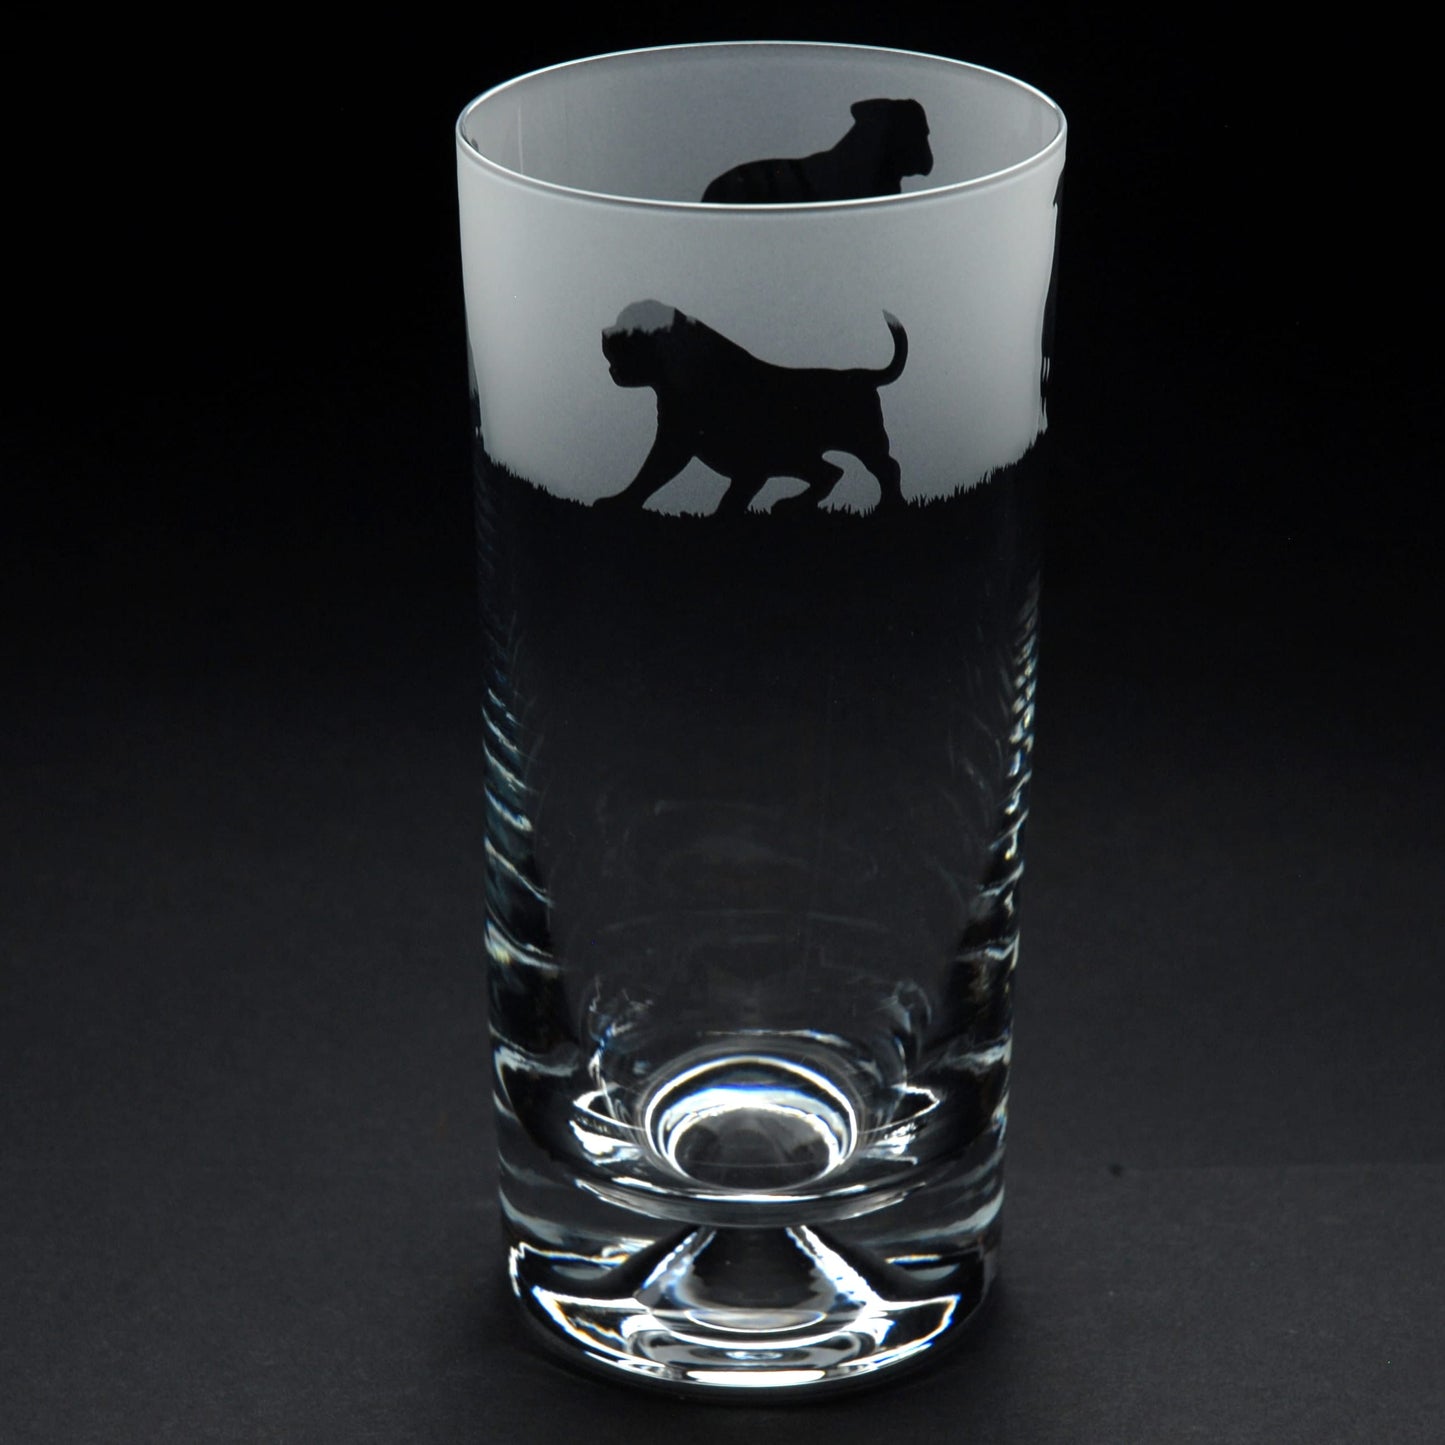 American Bulldog Dog Highball Glass - Hand Etched/Engraved Gift